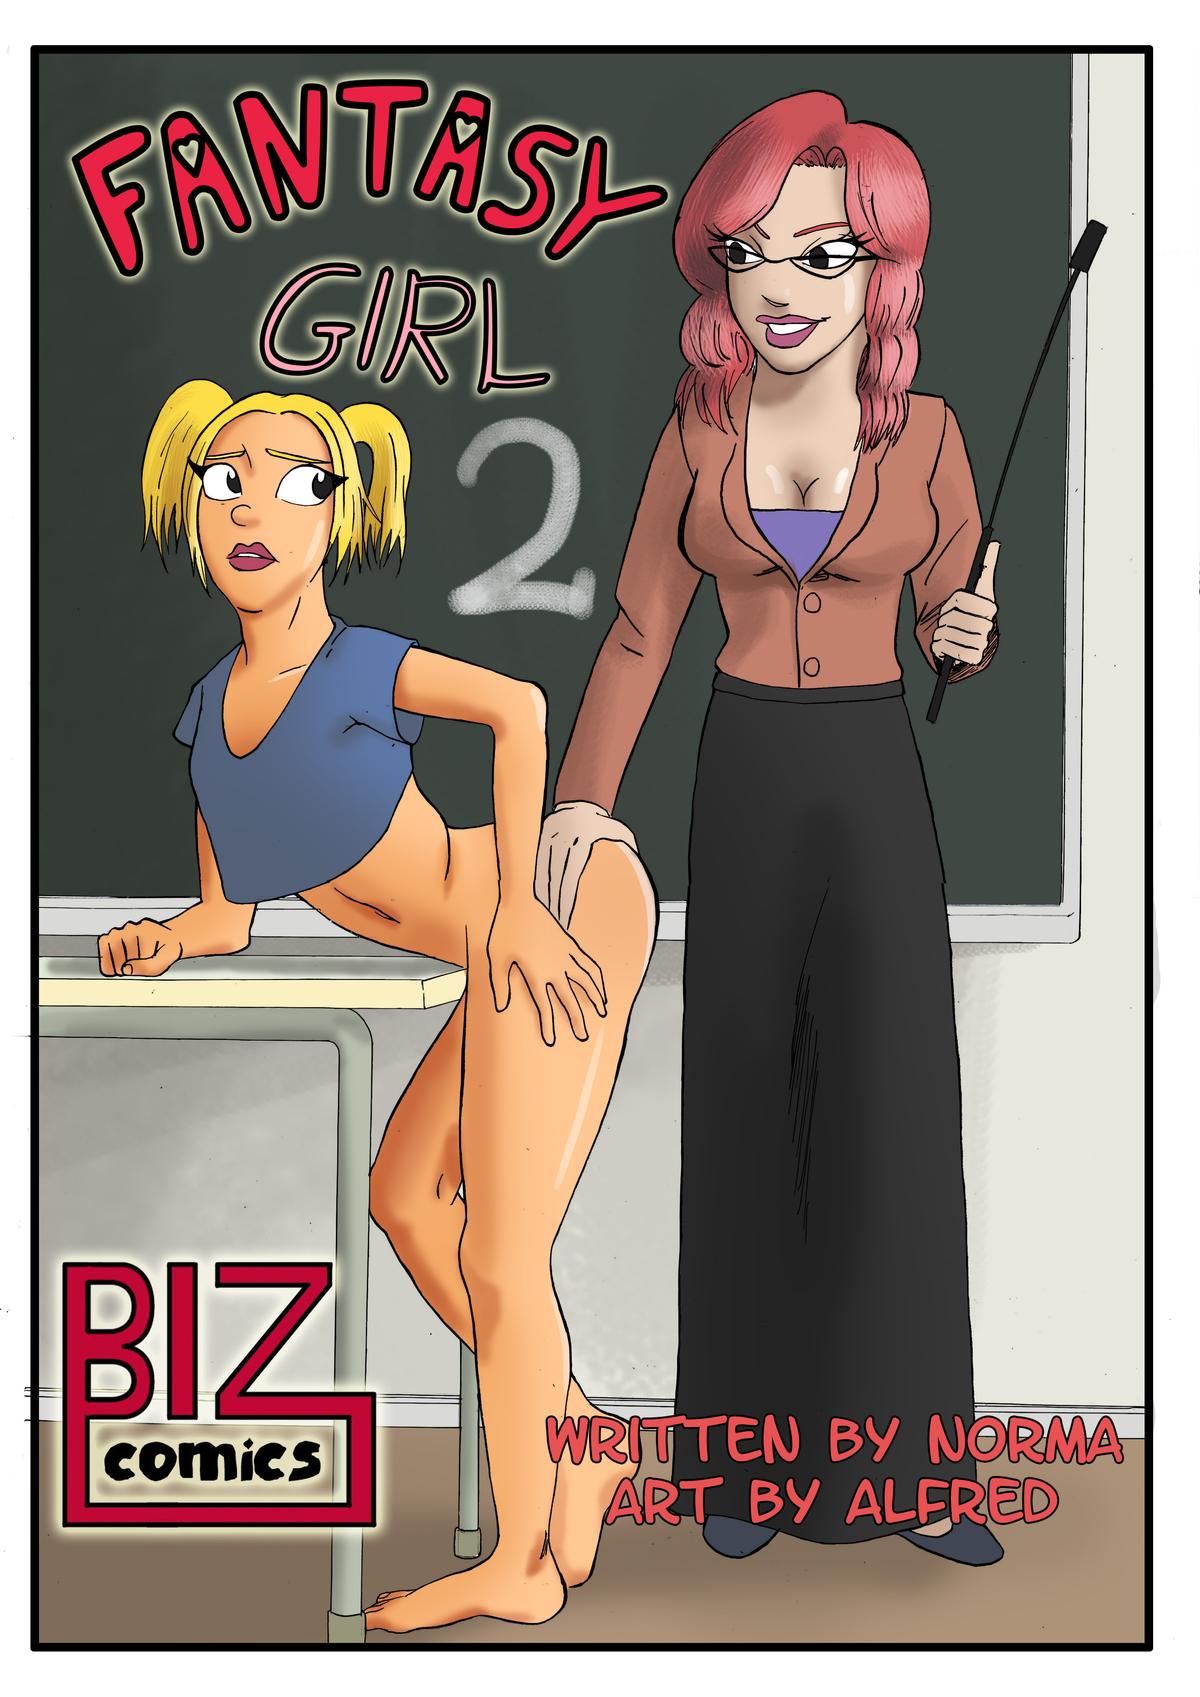 ass blonde breasts classroom comic desk fantasy_girl_#2 group kissing nipples nude pussy redhead student sucking teacher threesome